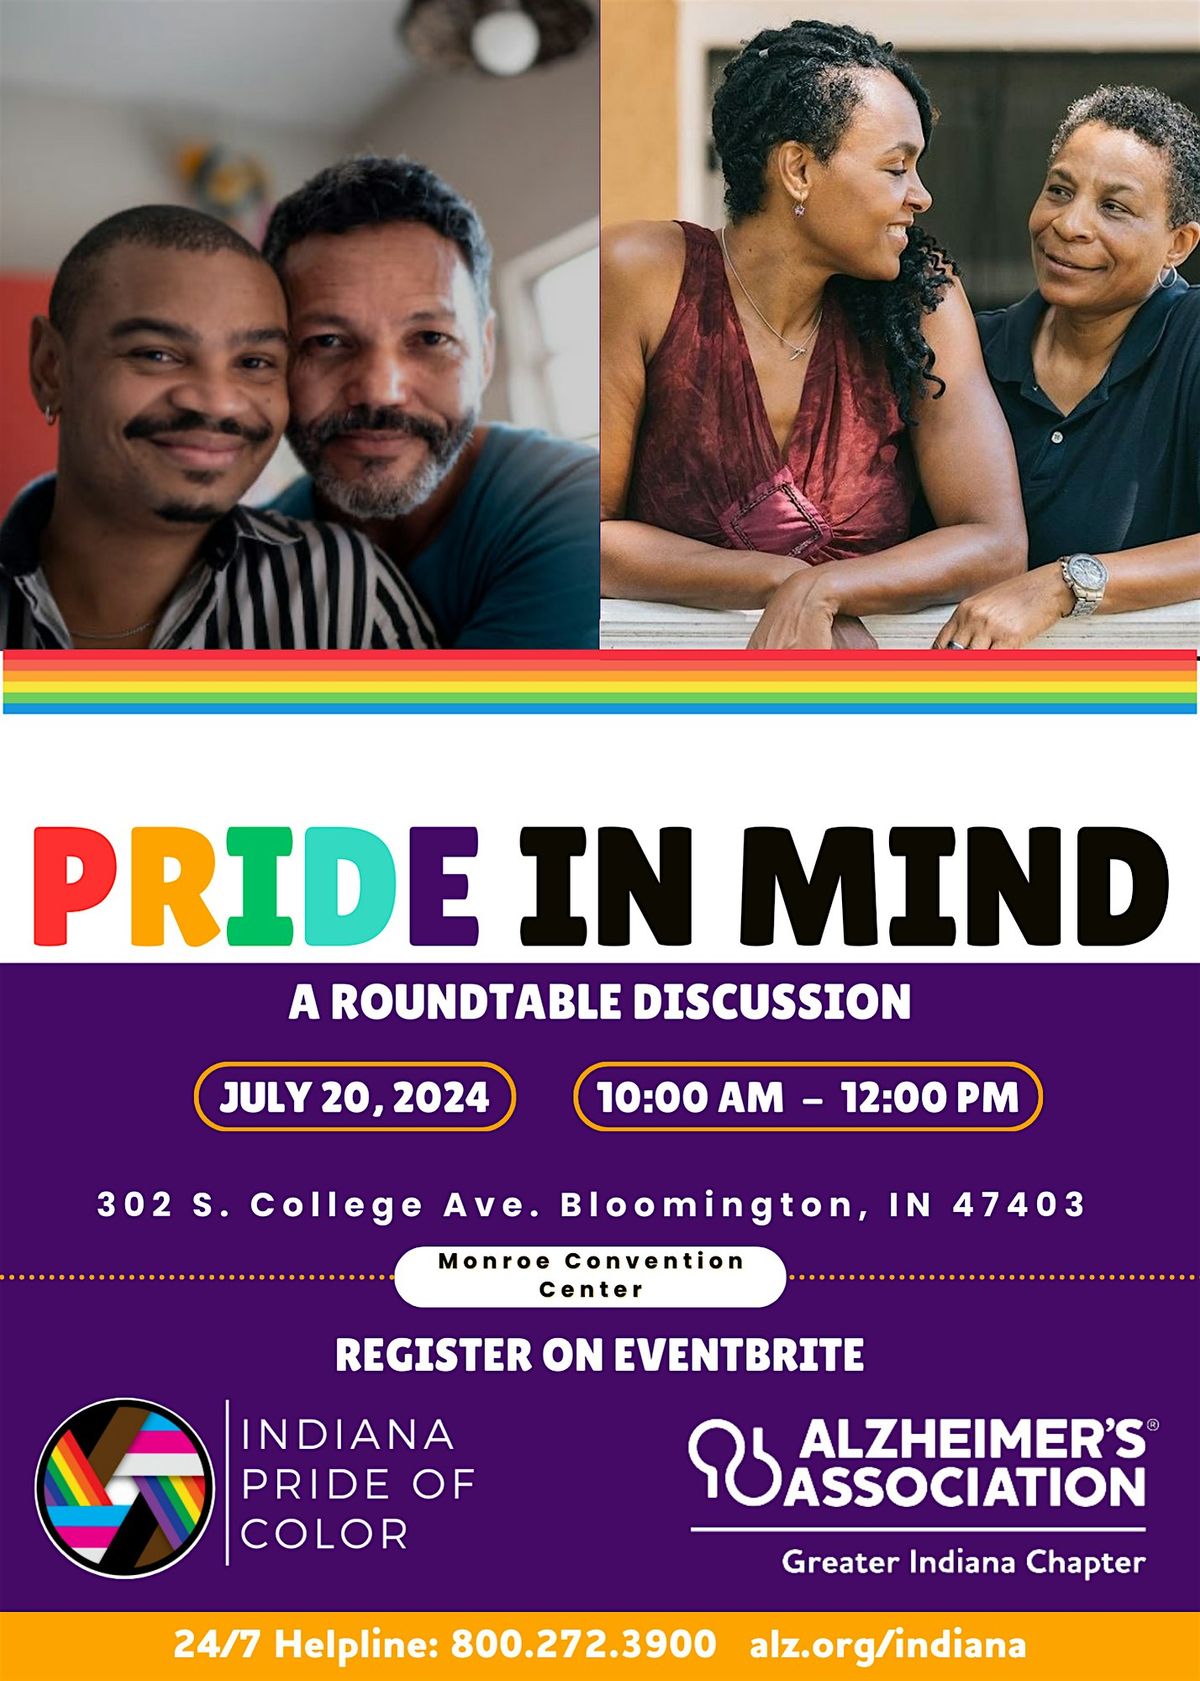 Pride in Mind: a roundtable discussion